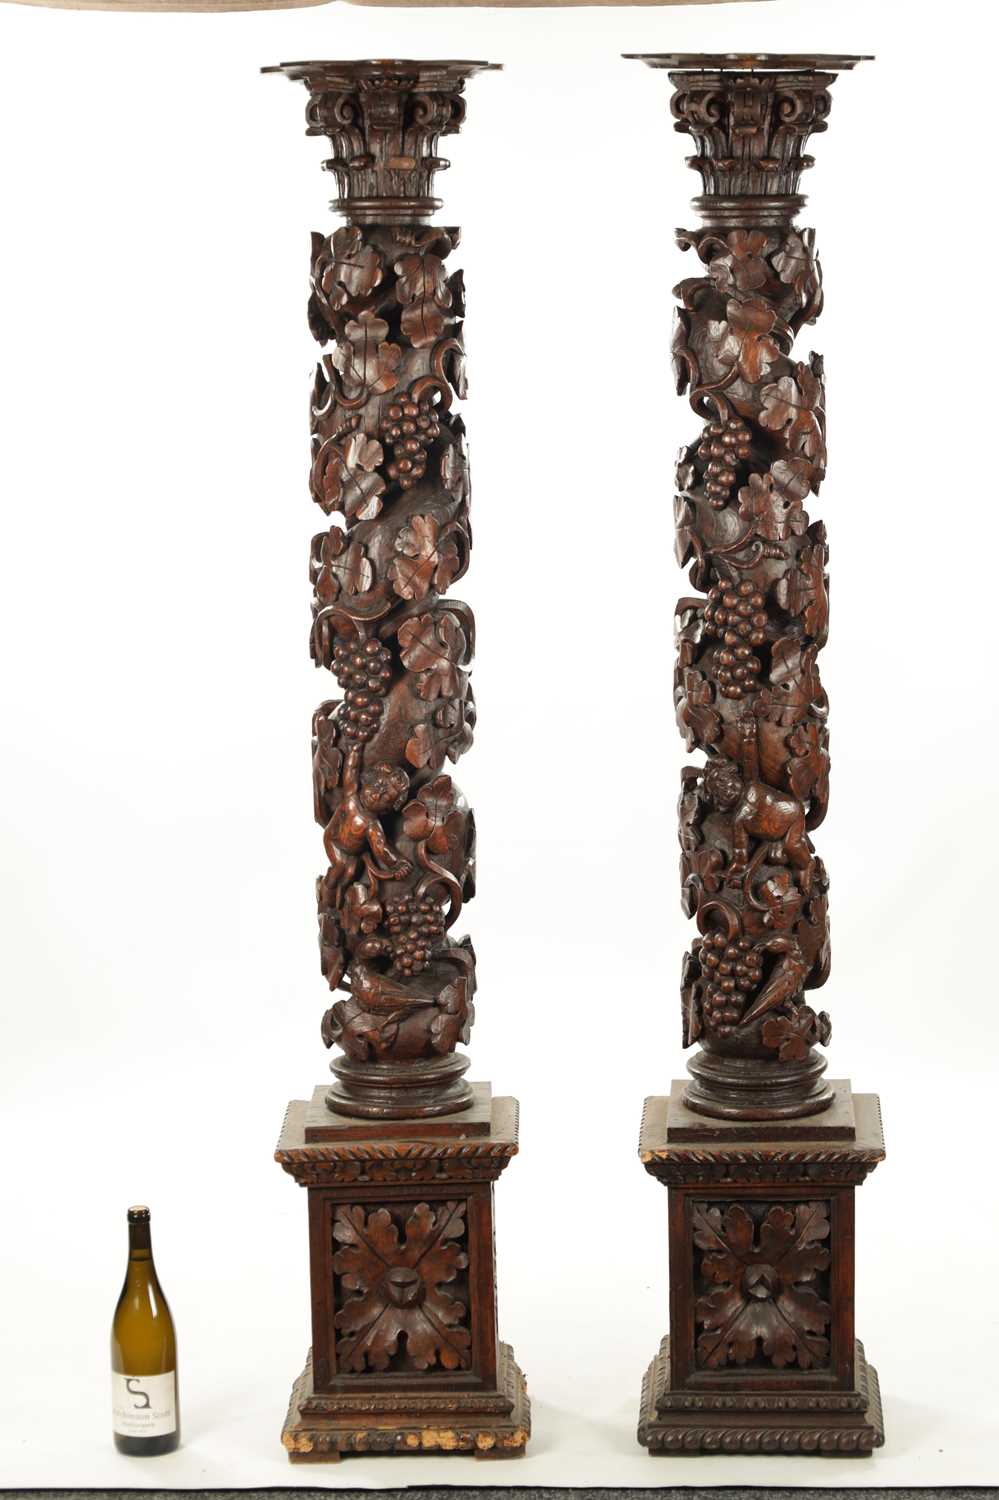 A PAIR OF LARGE 18TH / 19TH CENTURY CARVED WALNUT BARLEY TWIST COLUMNS - Image 2 of 8